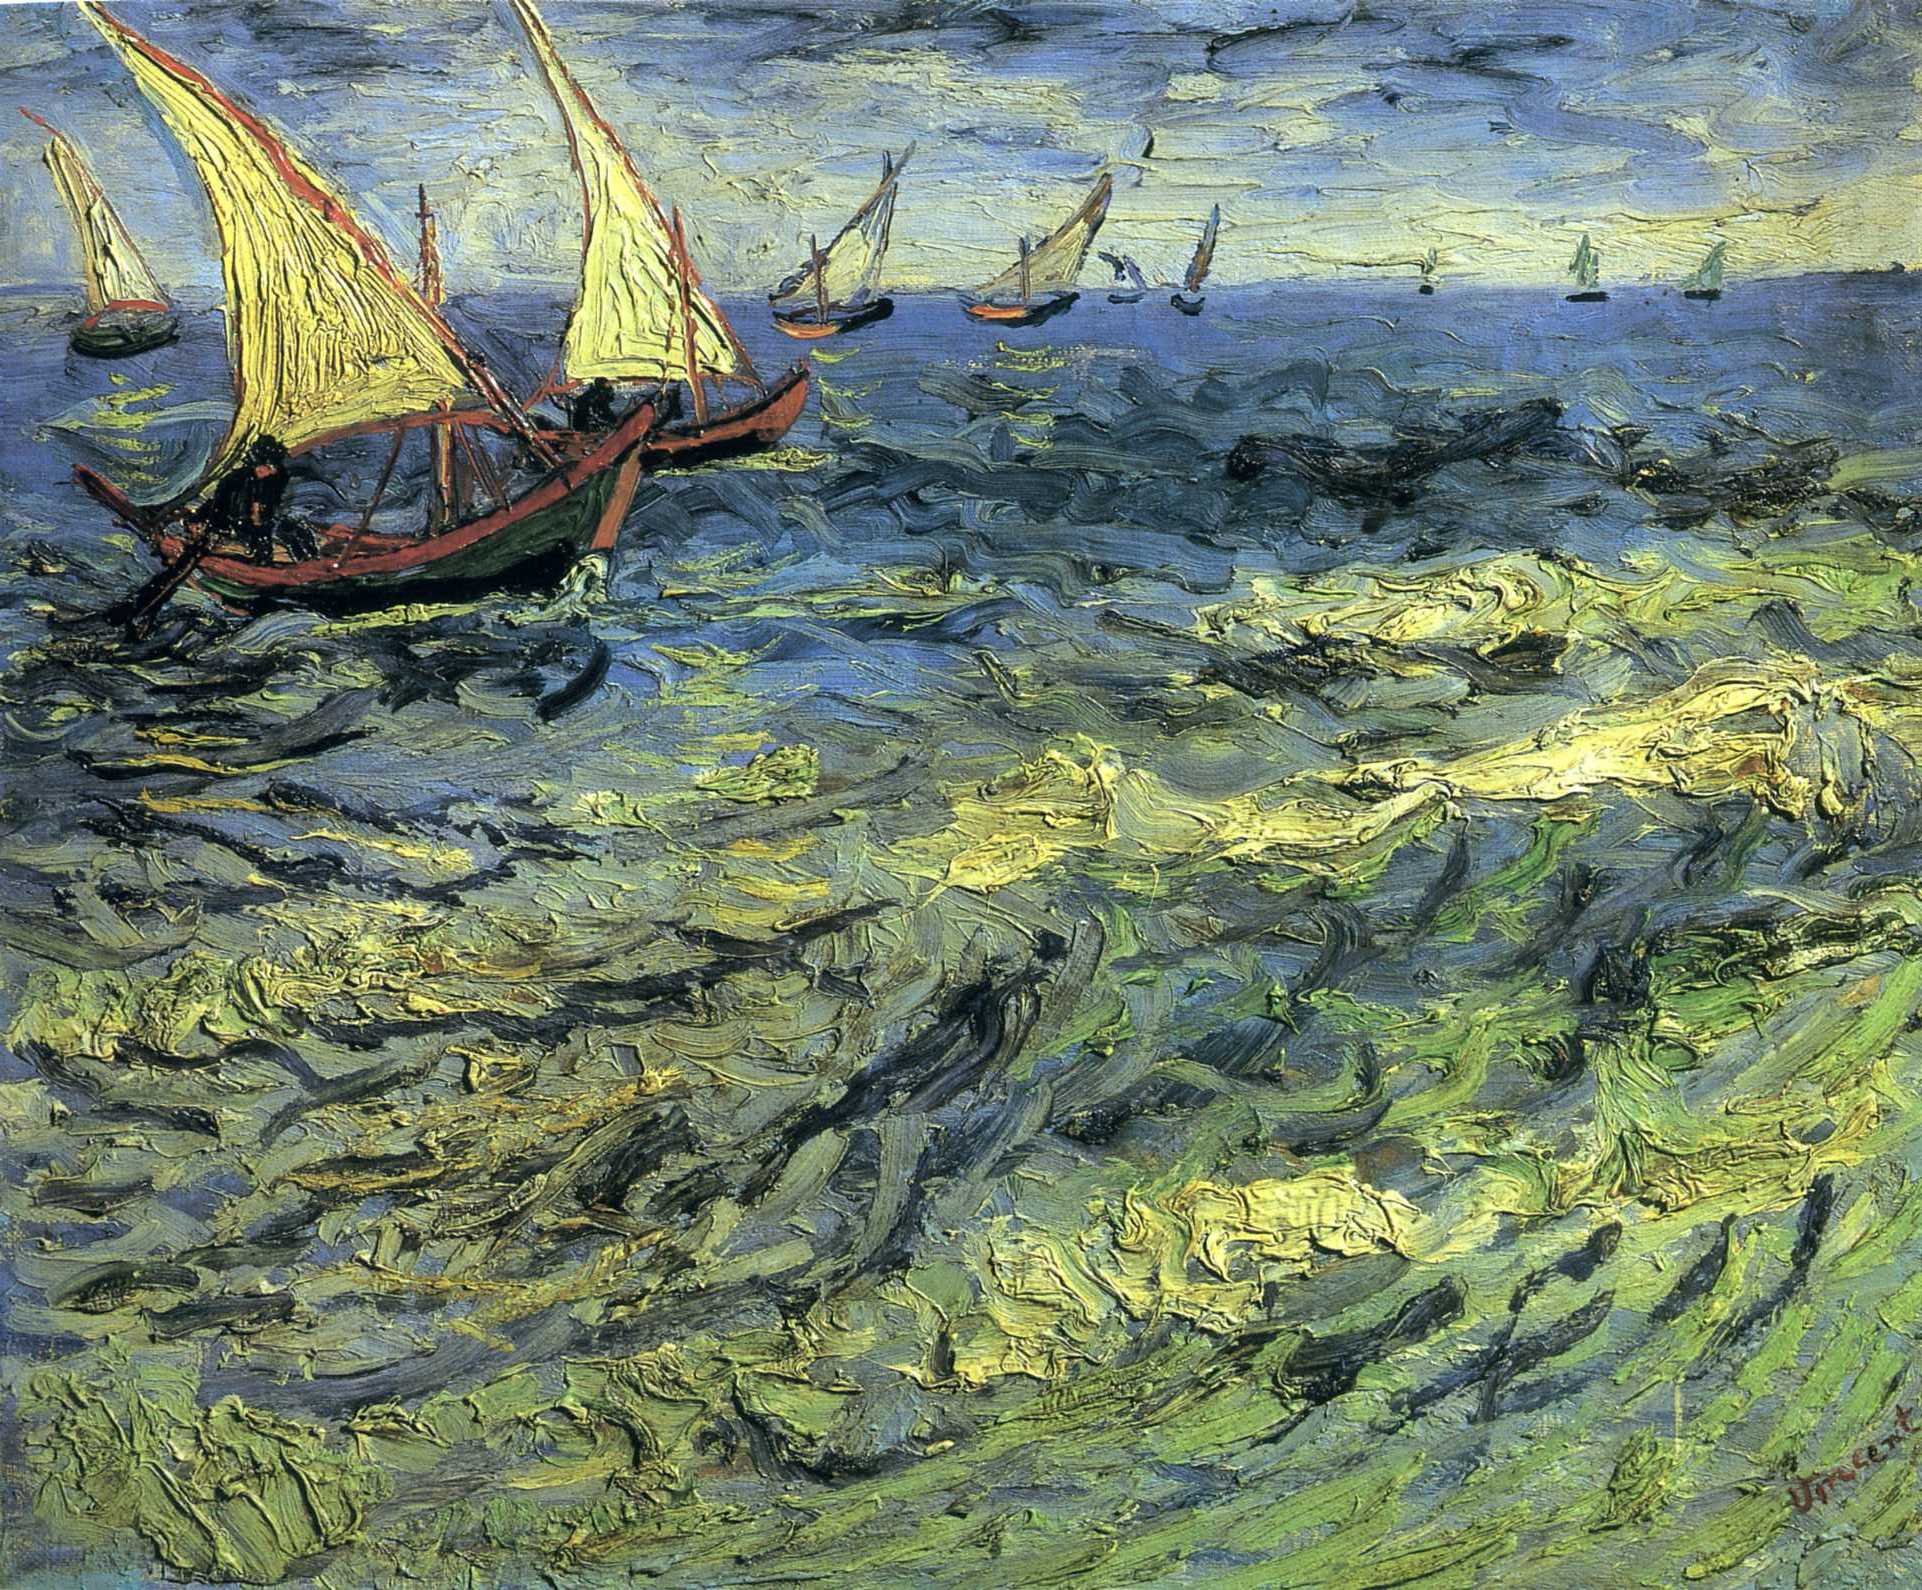 Fishing Boats at Sea by Vincent van Gogh - 1888 - 44 x 53 cm The Pushkin Museum of Fine Art